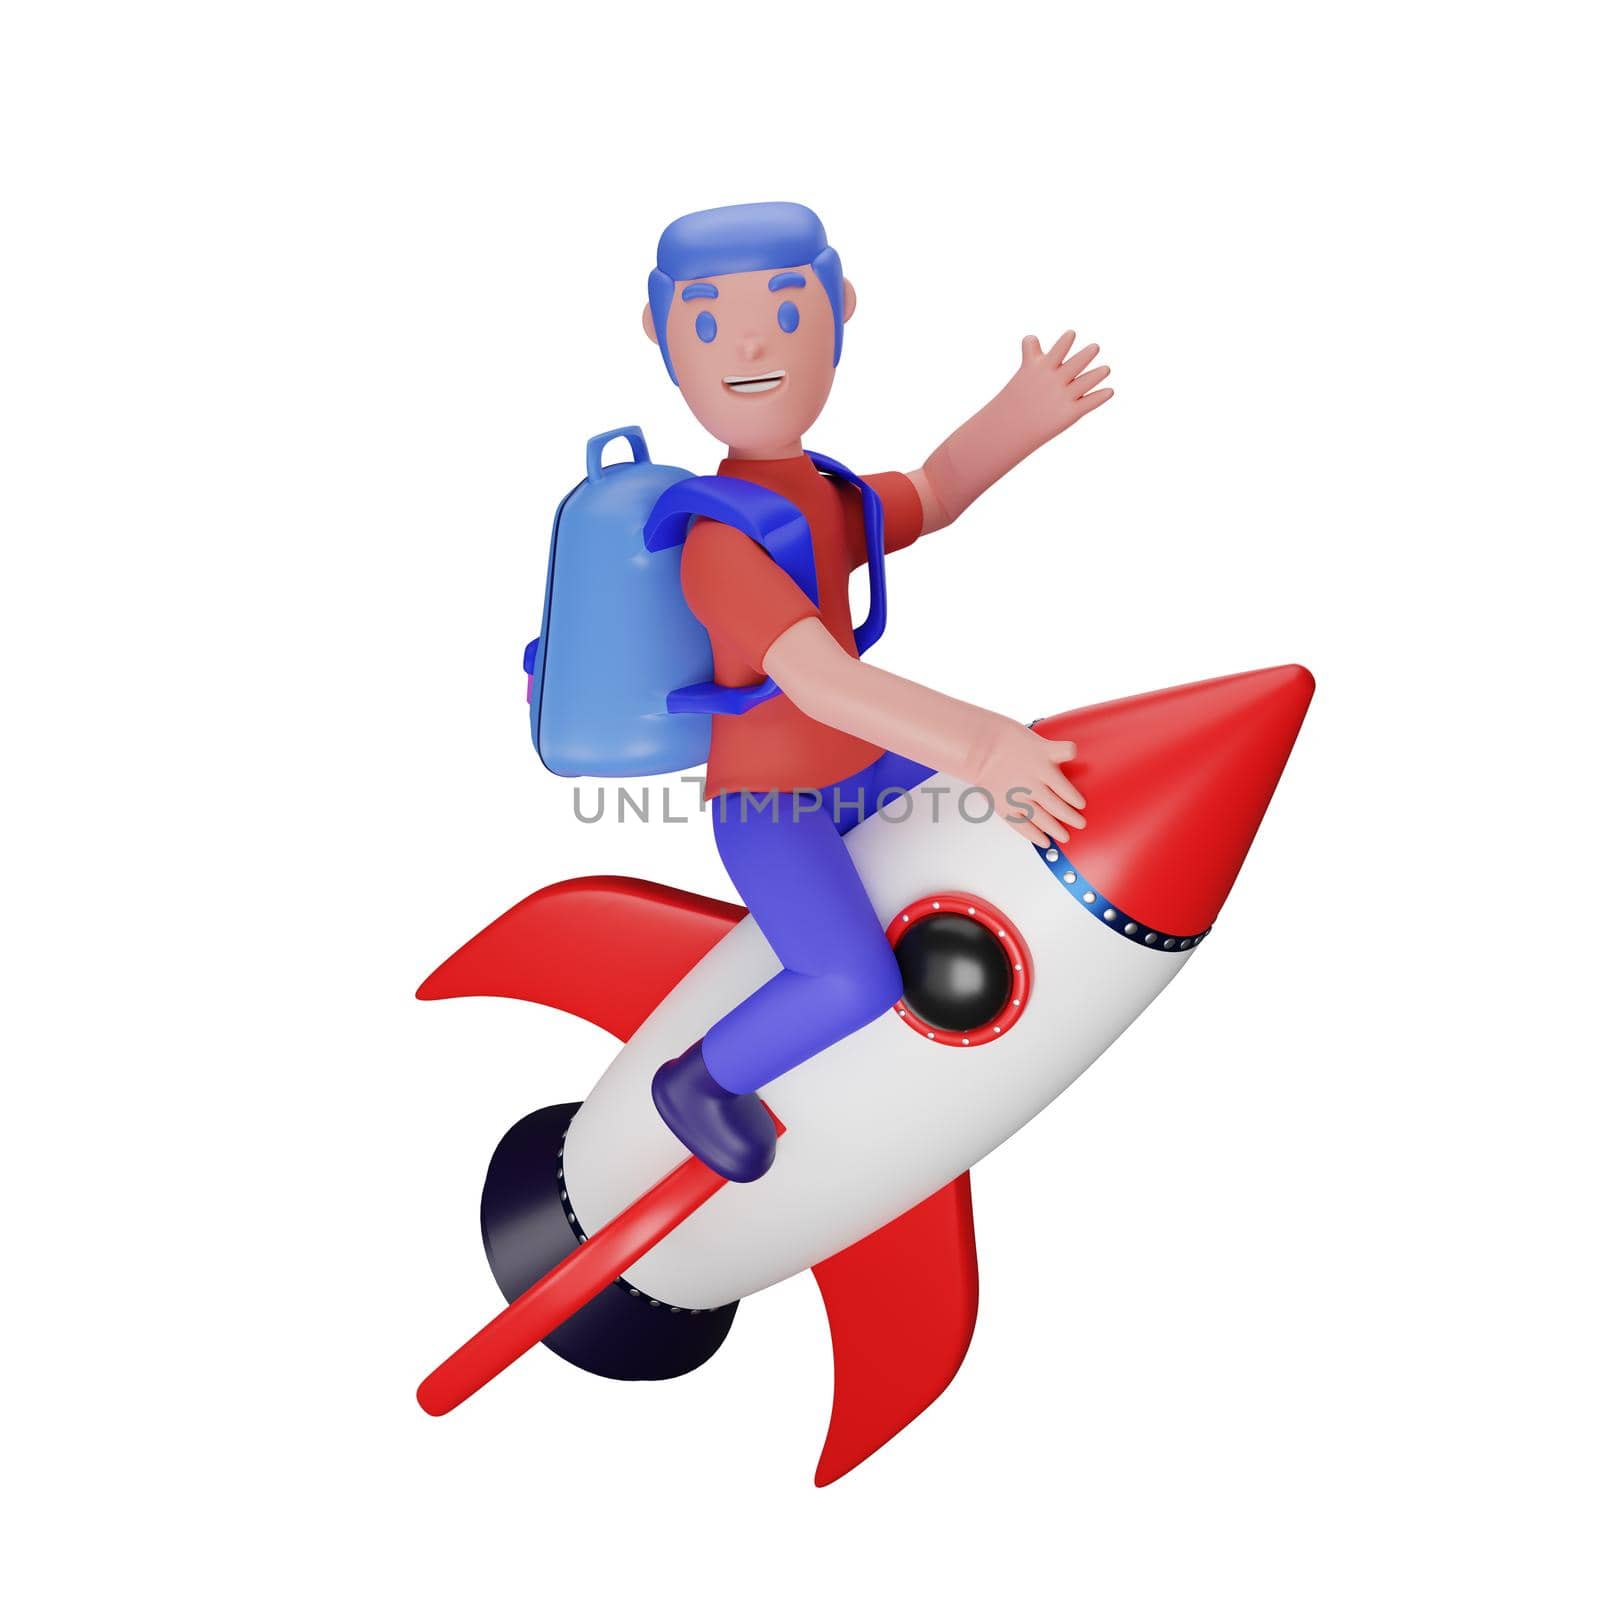 character riding a rocket with a back to school concept by Rahmat_Djayusman